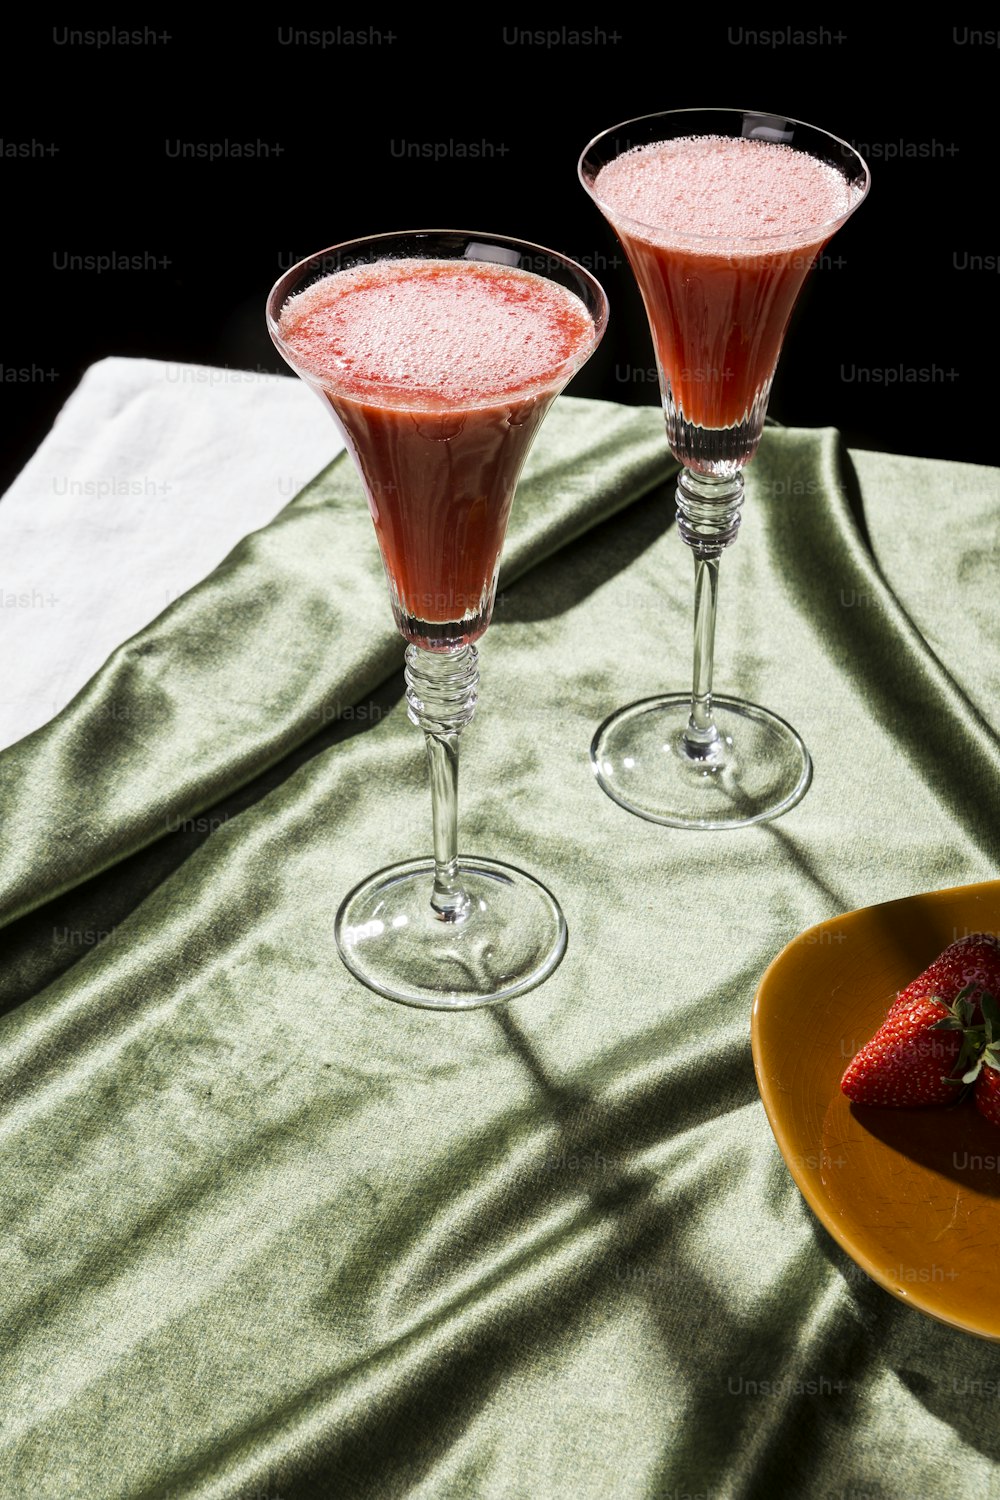 Rossini is a cocktail made with Prosecco or Champagne and strawberry puree; pop contemporary style photography